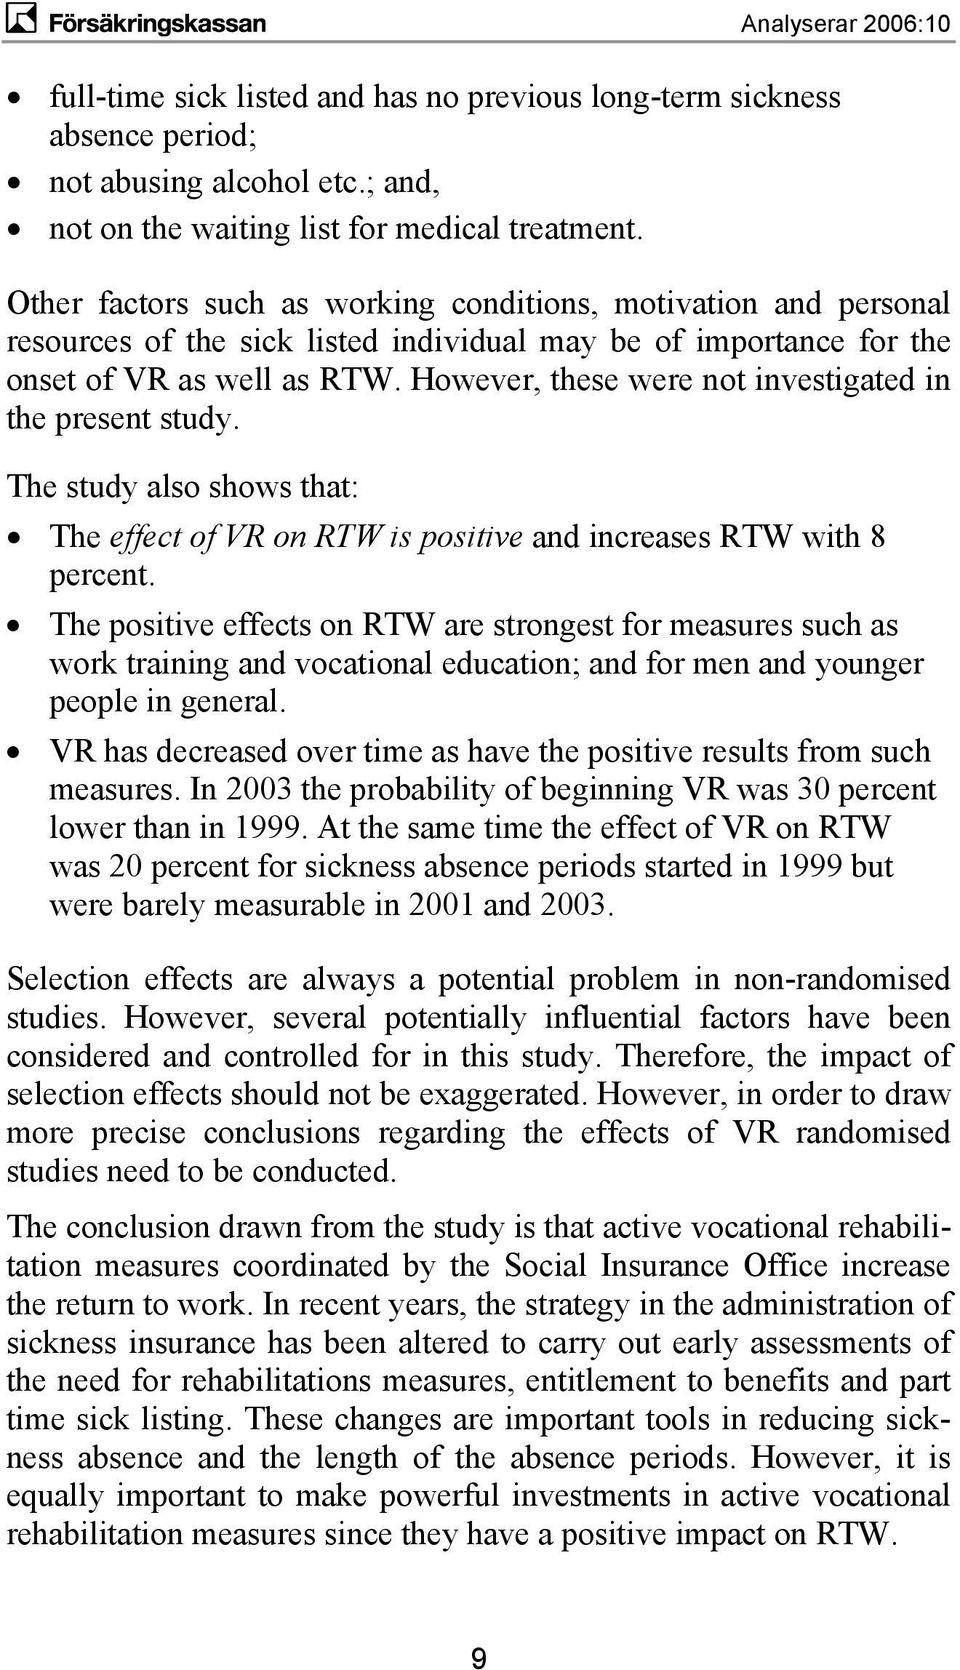 However, these were not investigated in the present study. The study also shows that: The effect of VR on RTW is positive and increases RTW with 8 percent.